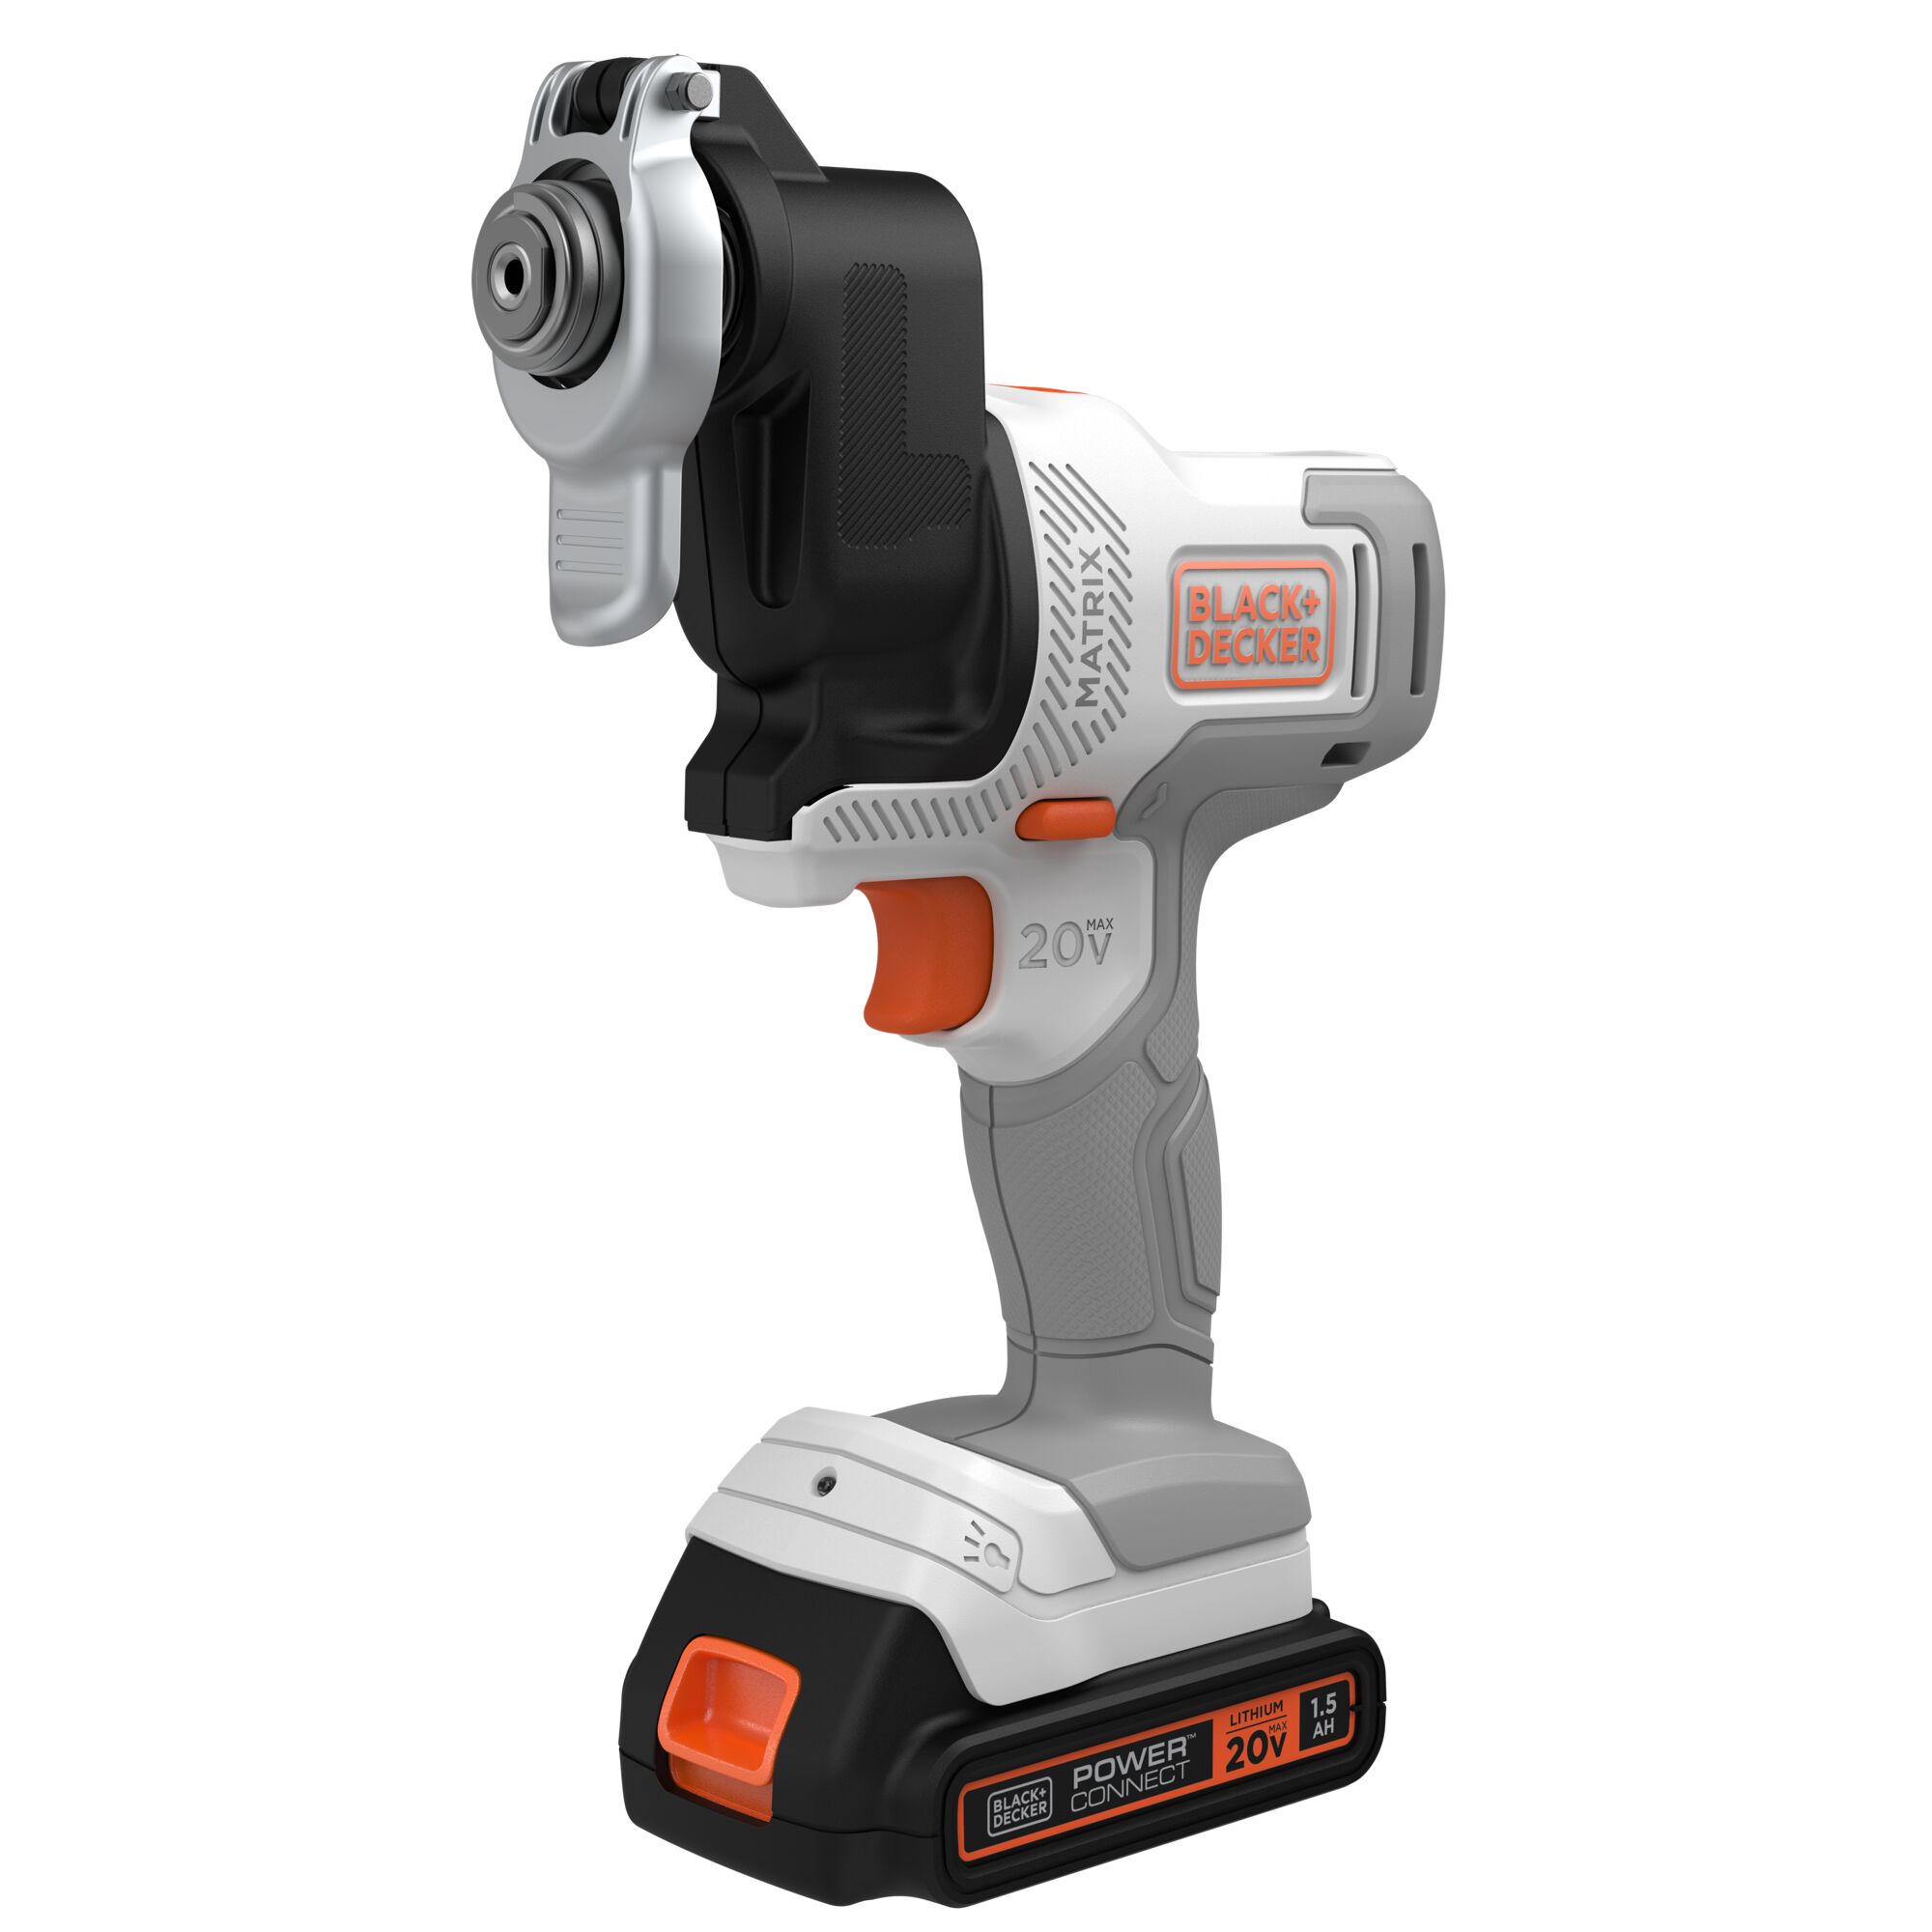 MATRIX Oscillating Tool Attachment with Tool free blade release feature.